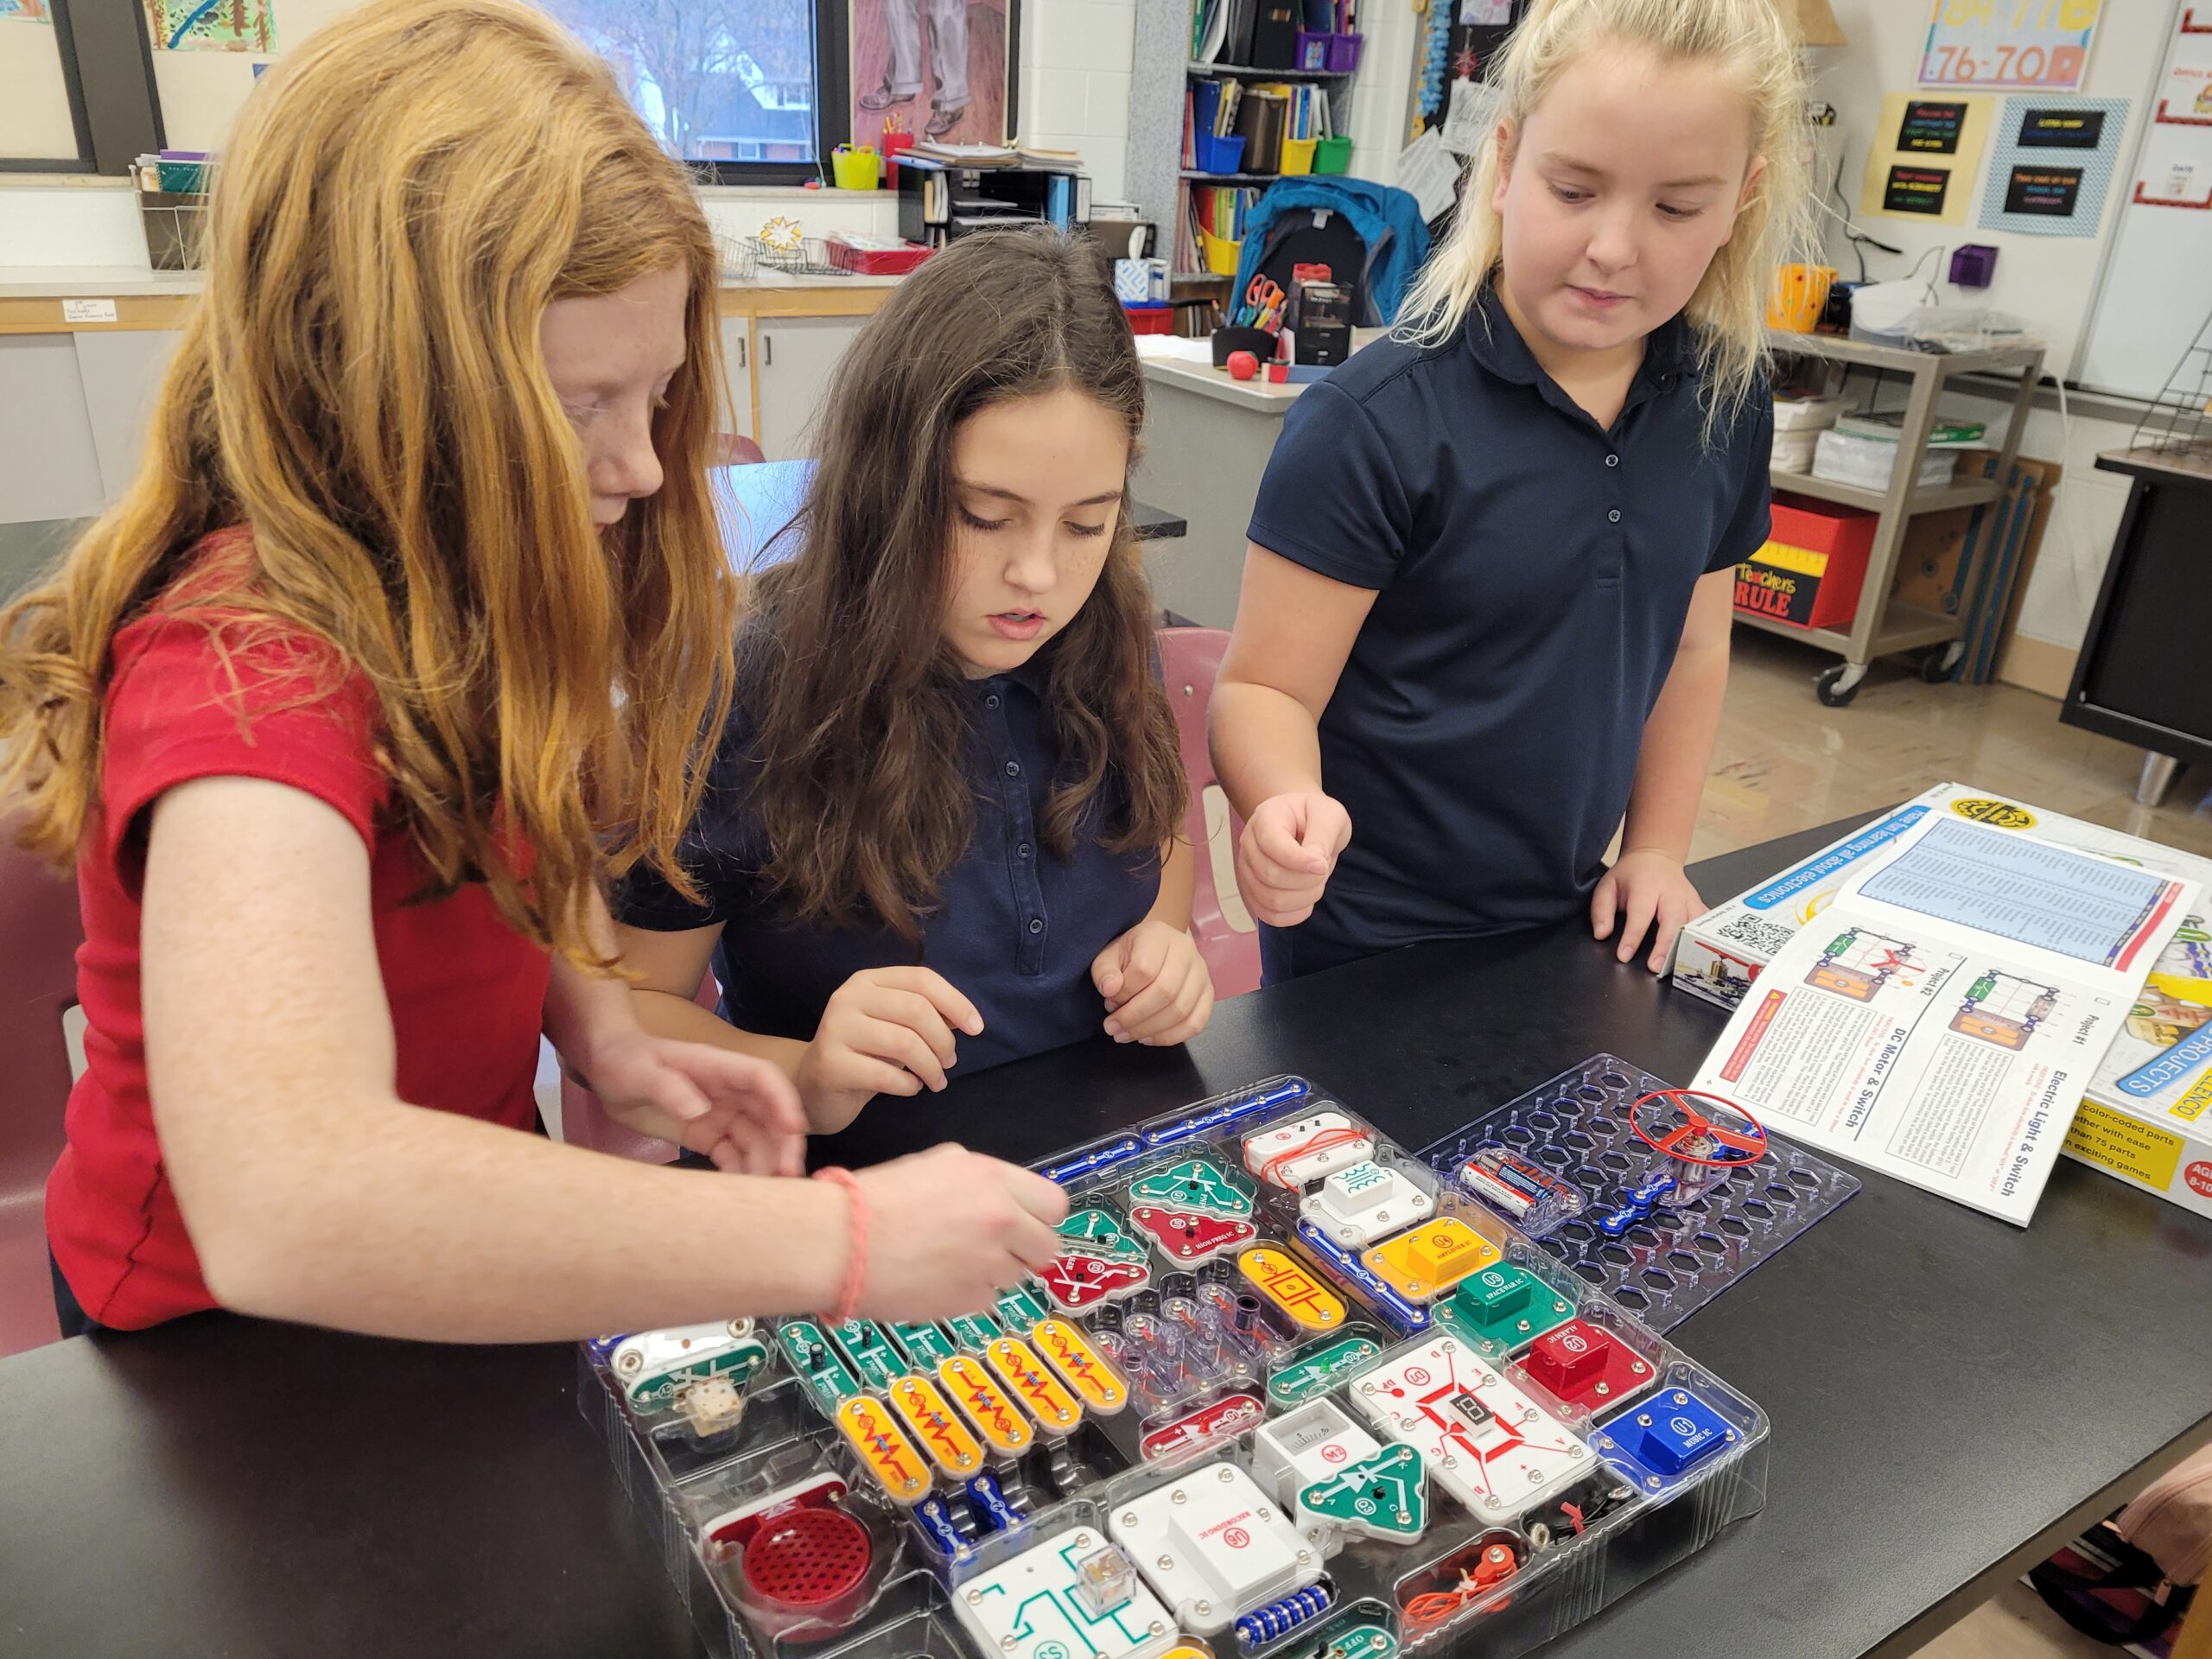 Our Lady of Lourdes Catholic School students work on project